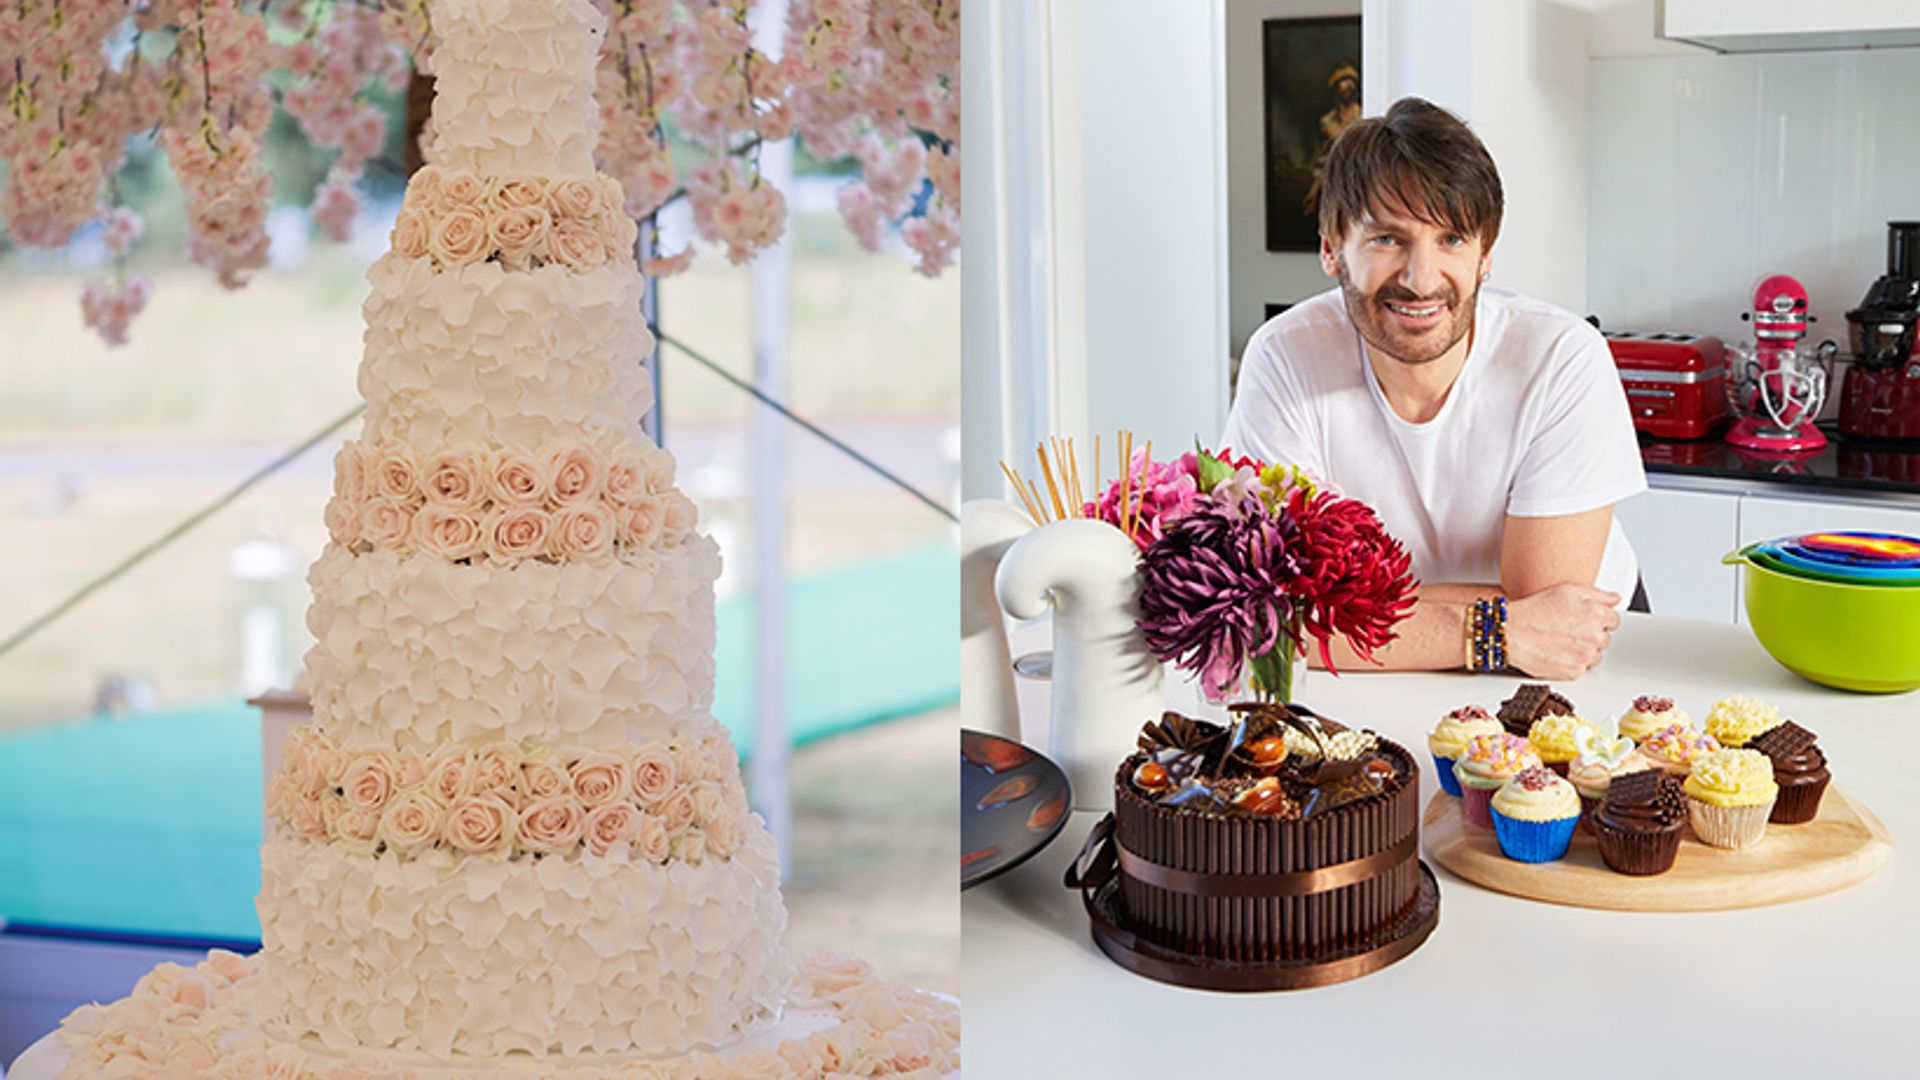 Celebrity chef Eric Lanlard reveals how to make your own showstopper cake